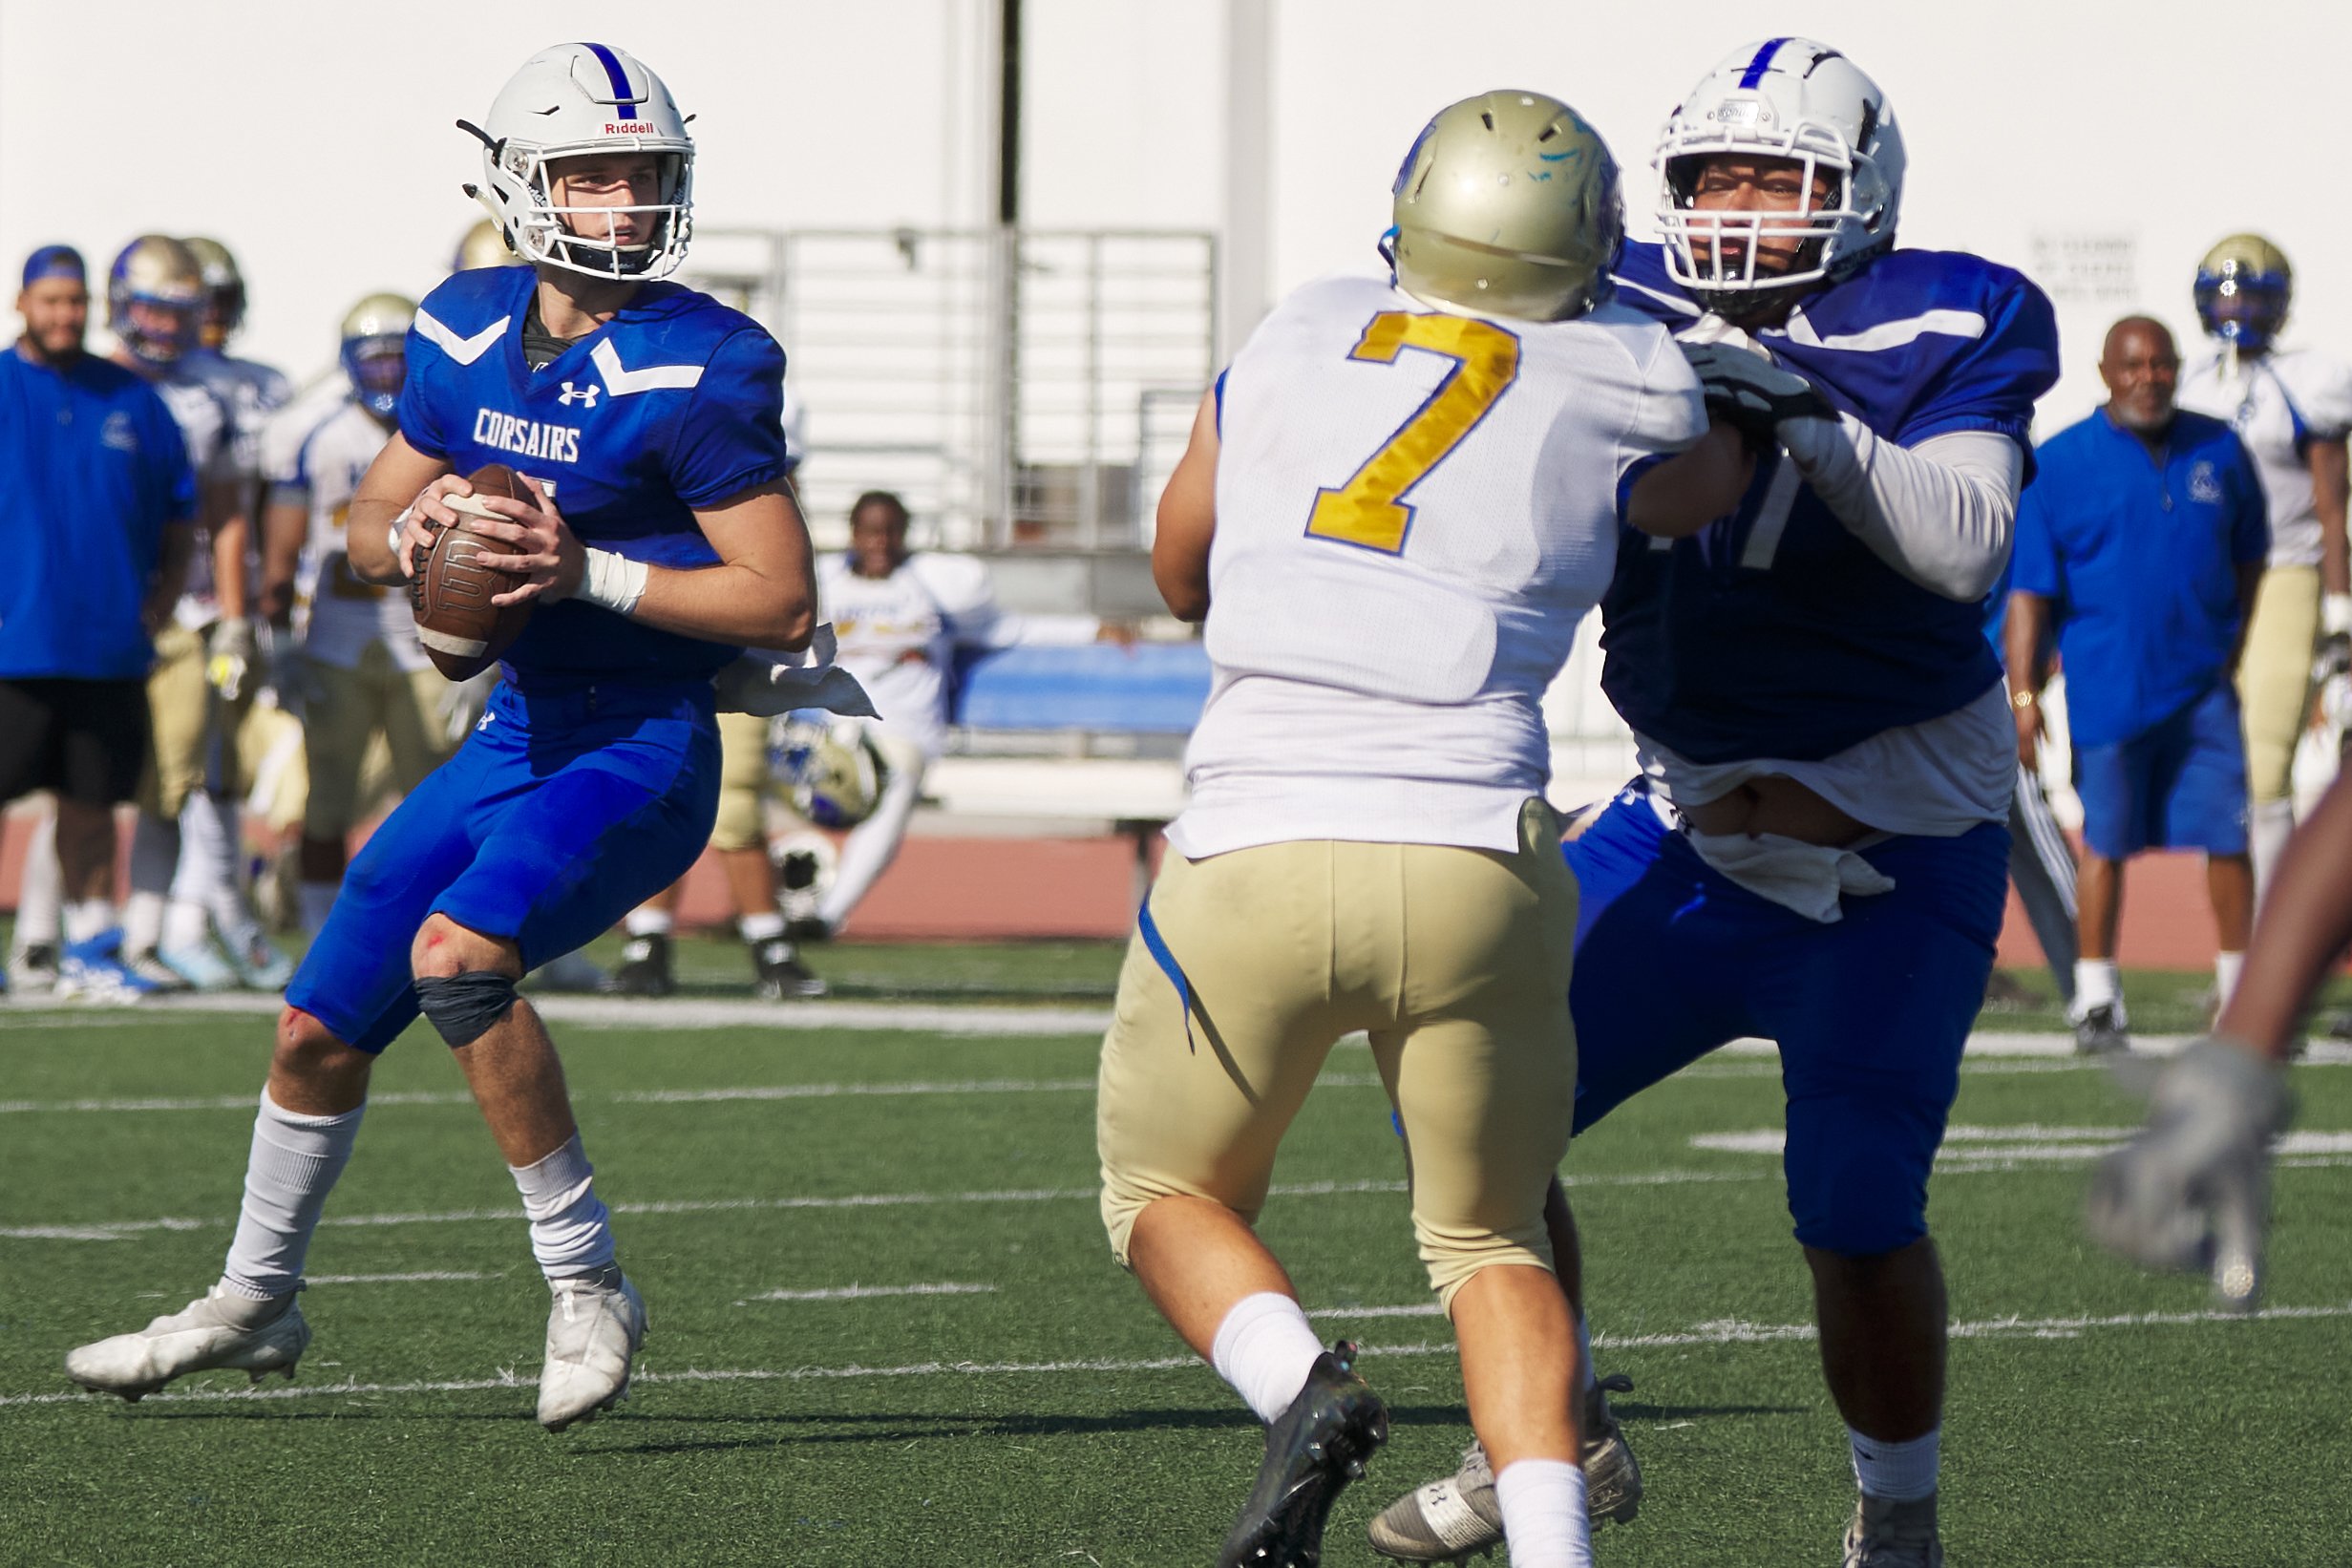  Santa Monica College Corsairs' Forrest Block (left) prepares to throw the ball while Carlos Orea (right) defends him from West Los Angeles College Wildcats' Christopher Gonzales (center) during the football match on Saturday, October 1, 2022, at Cor